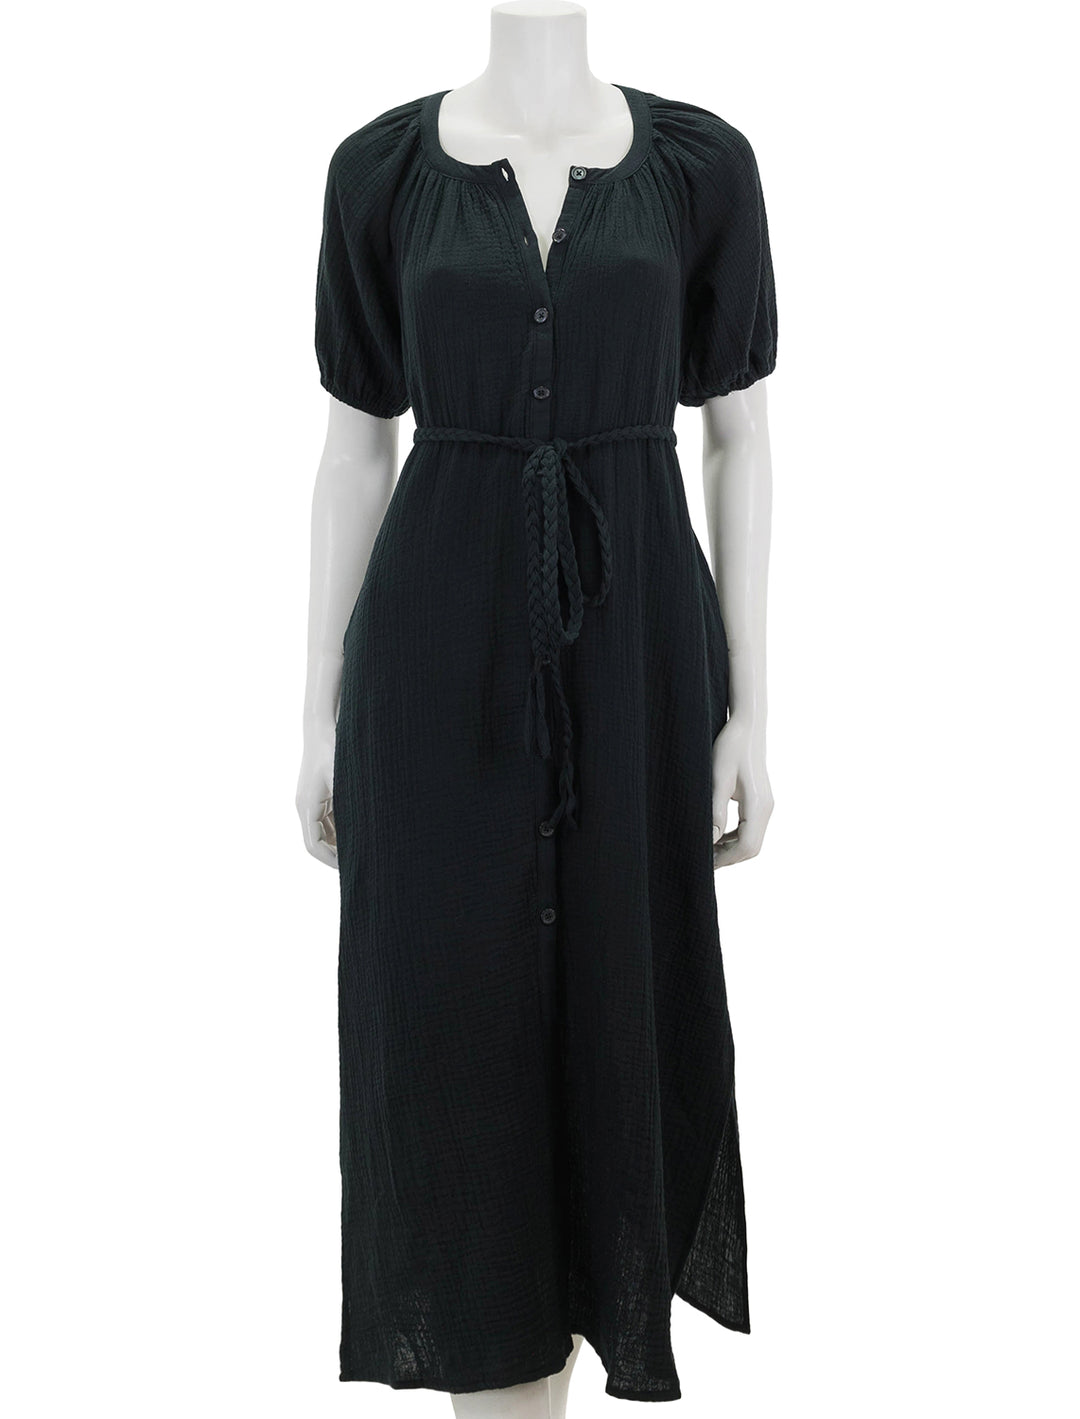 Front view of Marine Layer's double cloth shirt dress in black.